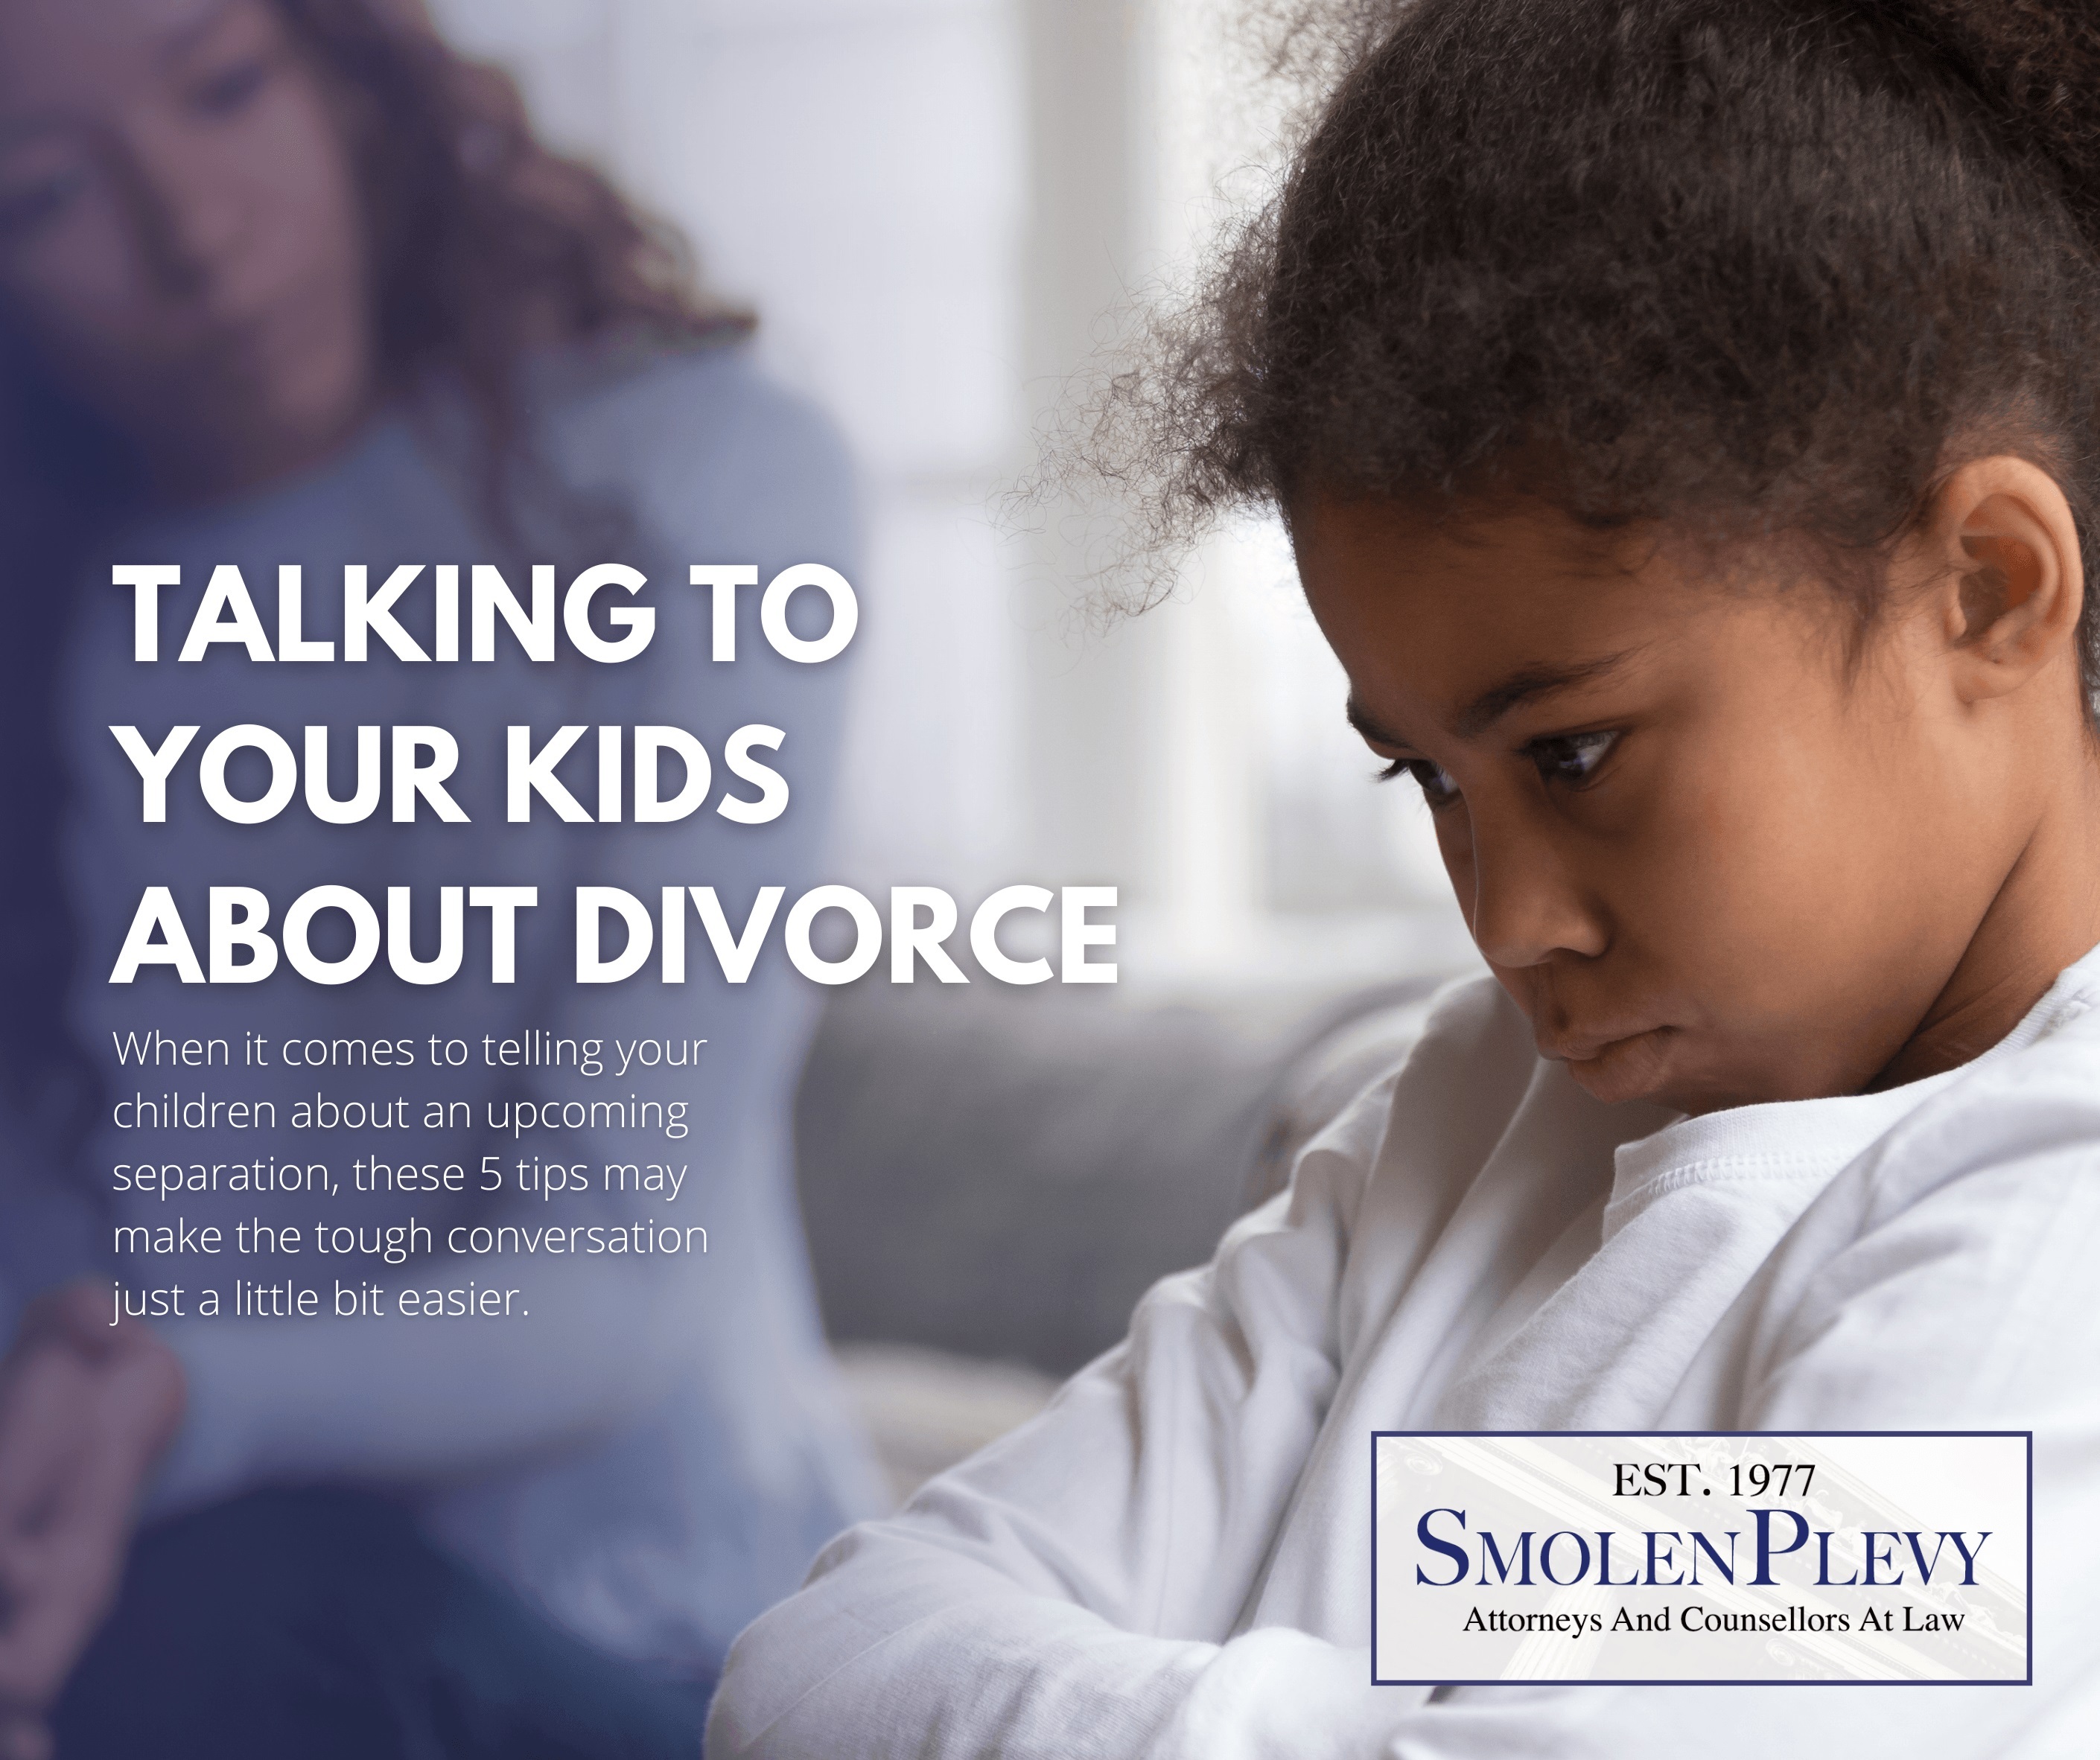 Tips for talking to your kids about divorce